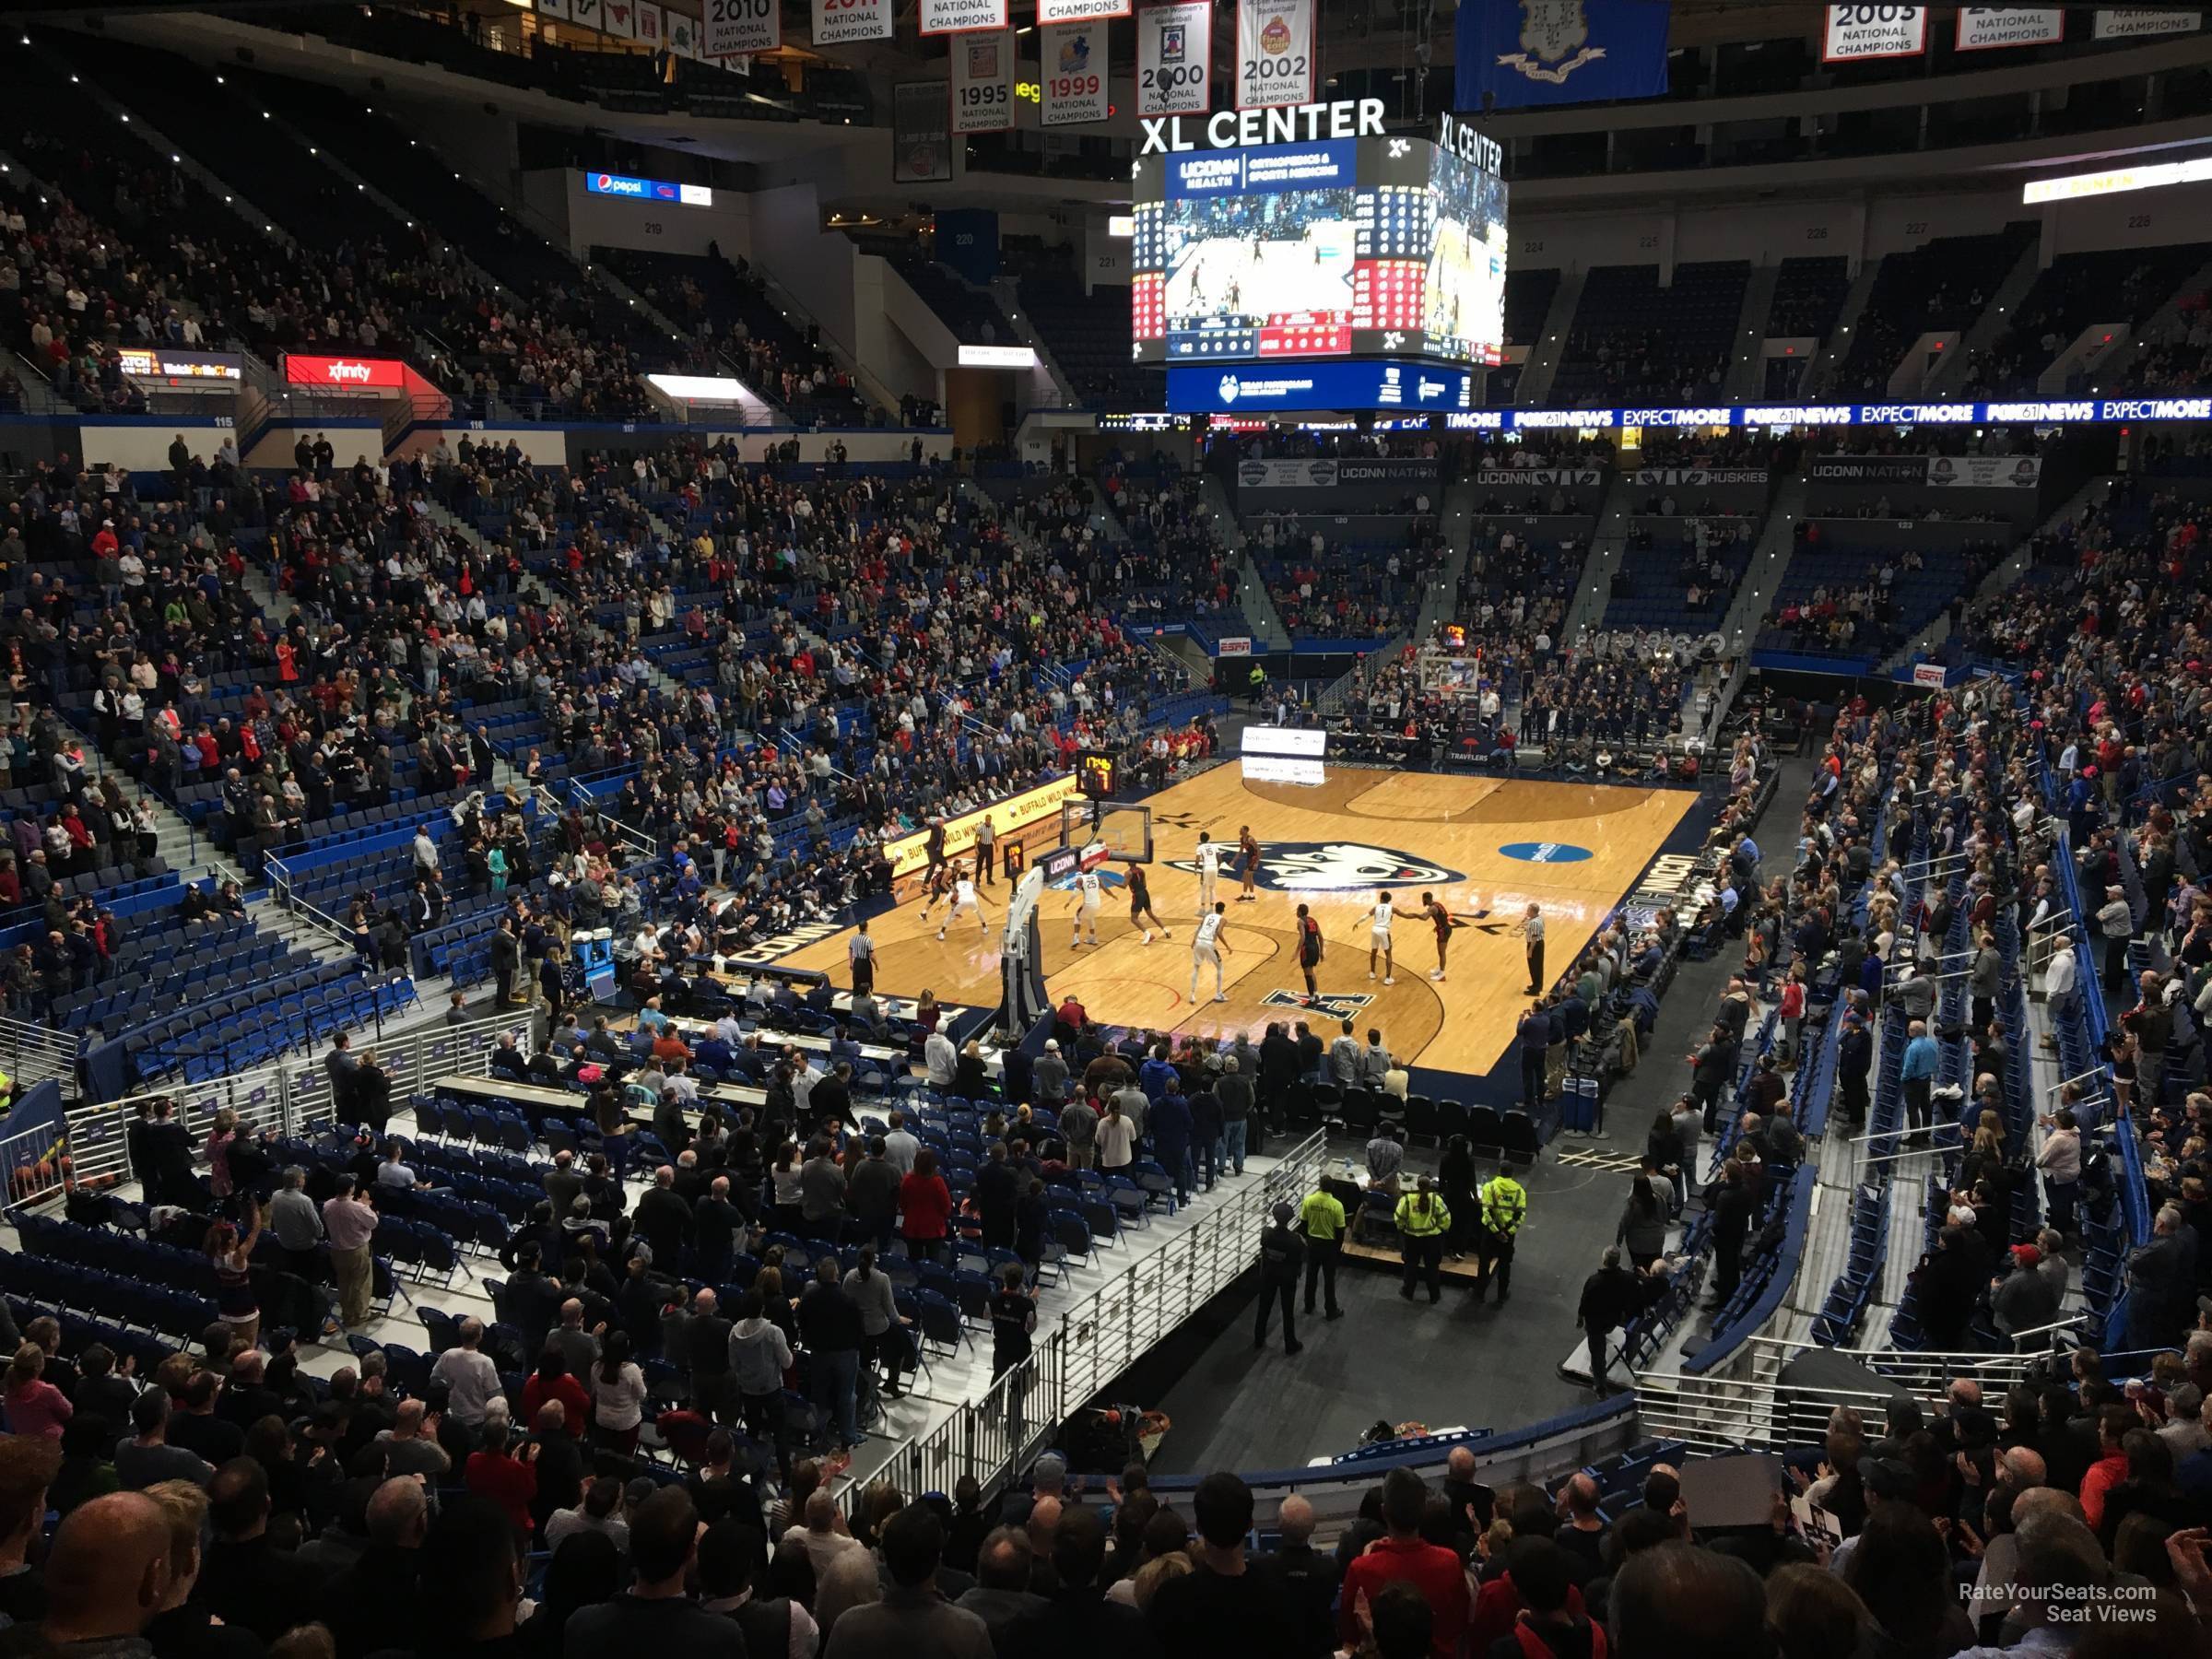 section 108, row s seat view  - xl center